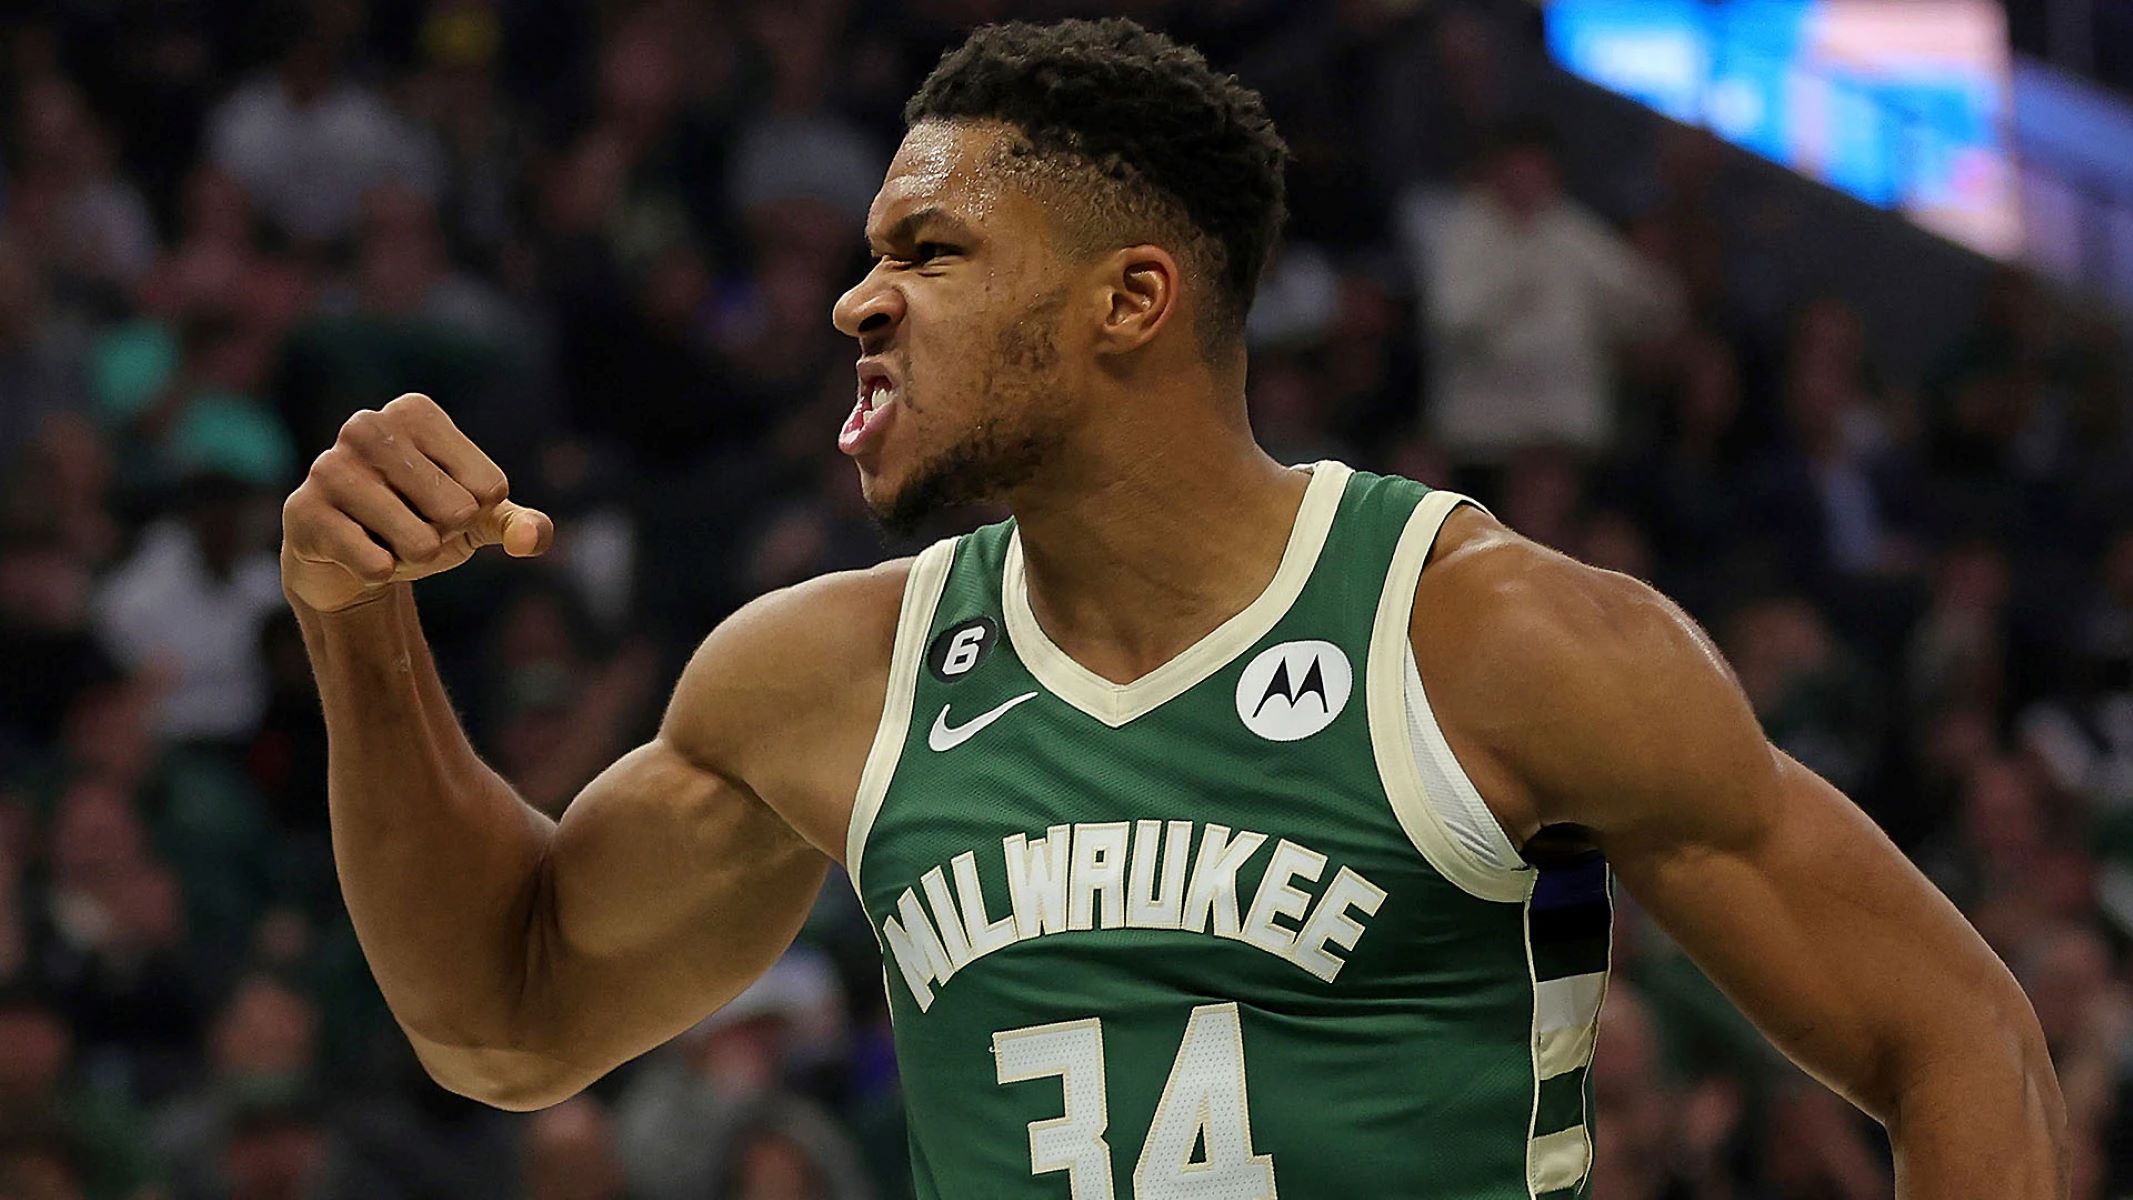 Shocking Truth: Giannis' Weight Revealed - You Won't Believe The Numbers!